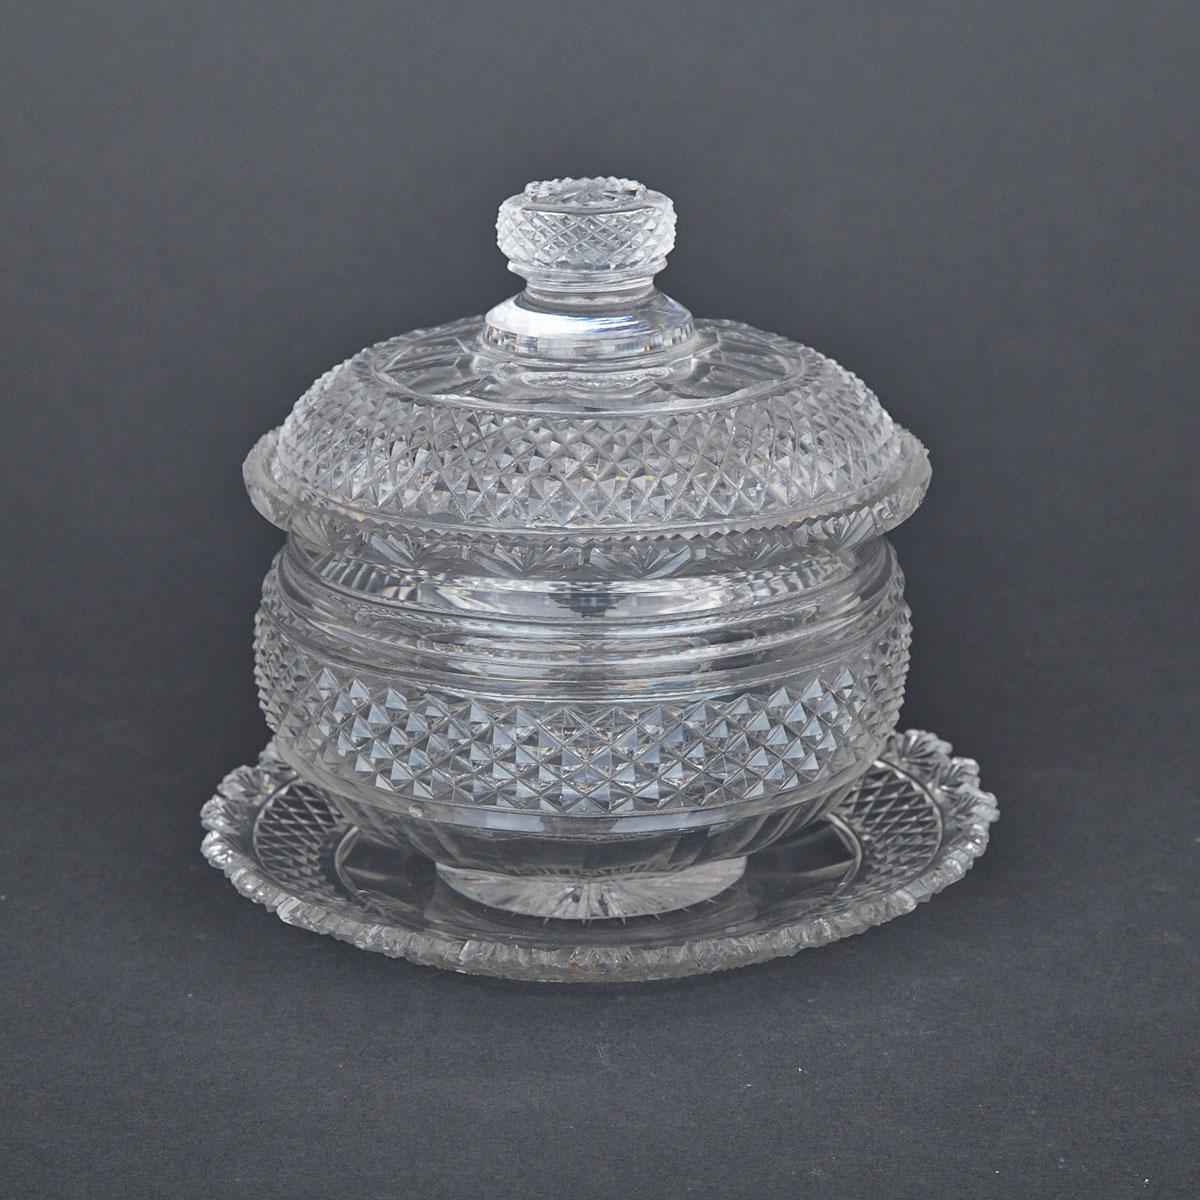 Anglo-Irish Cut Glass Covered Bowl and Stand, 19th century